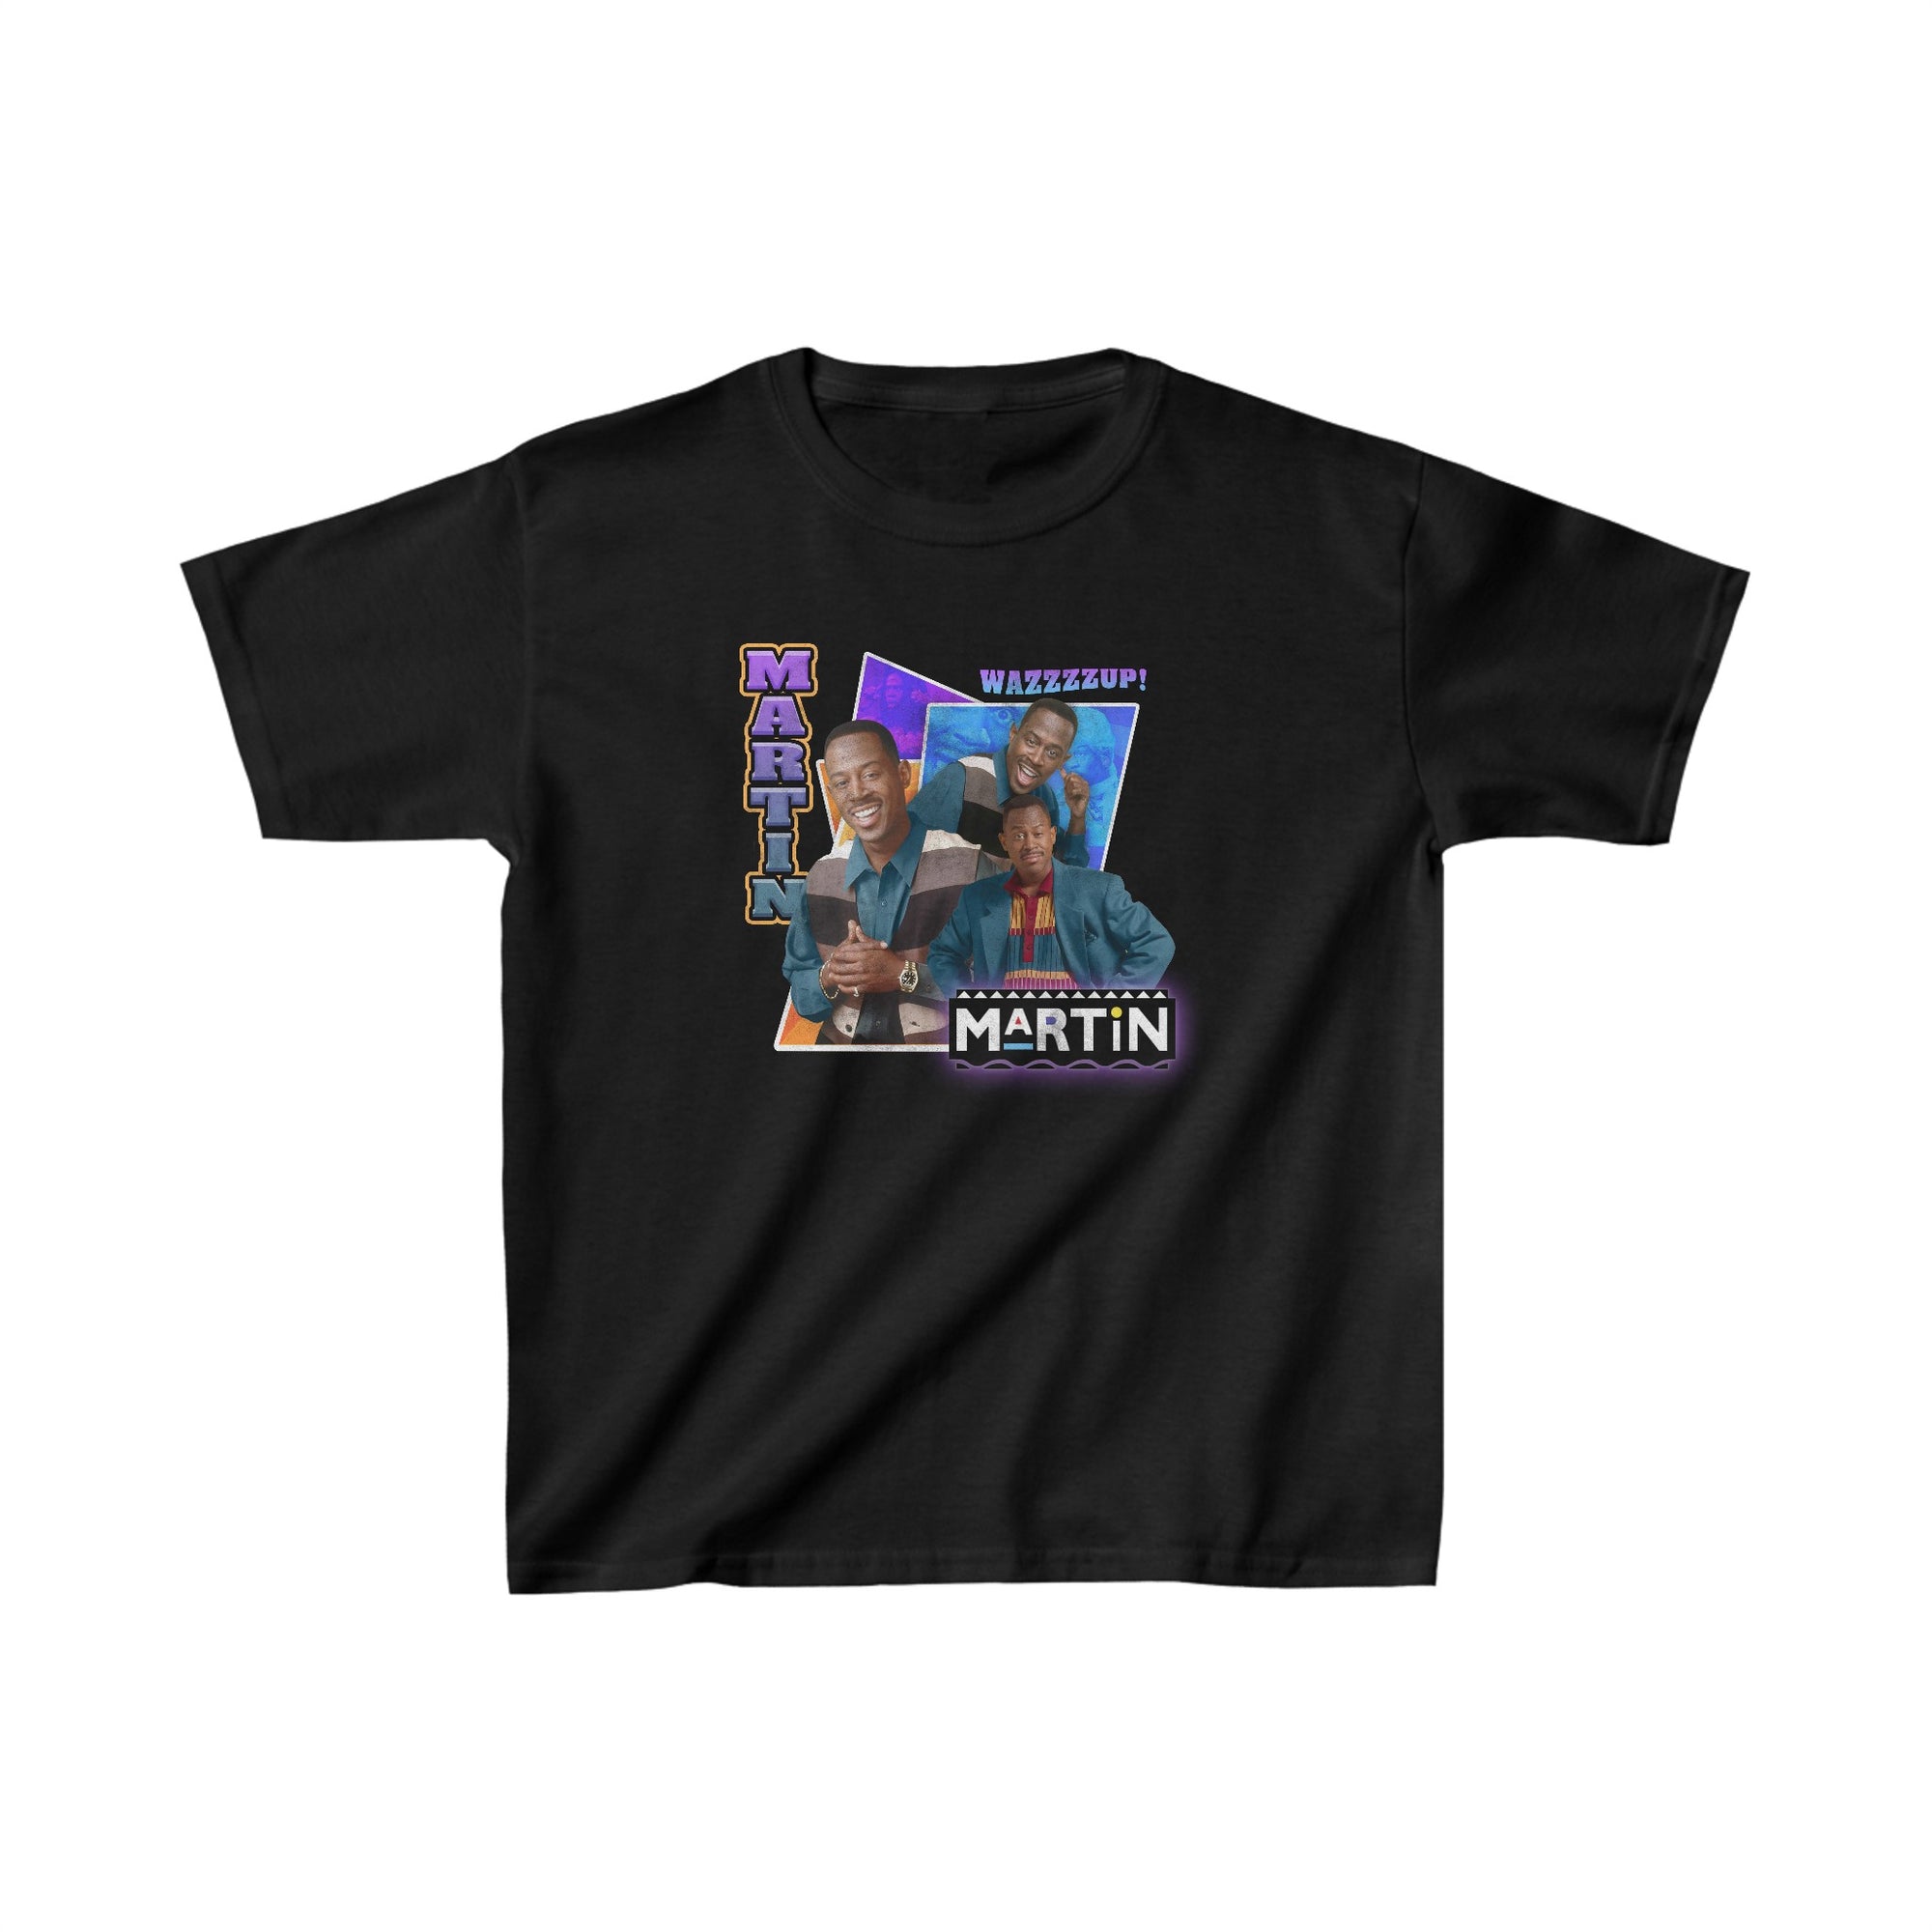 WAZZZZUP! Youth Tee